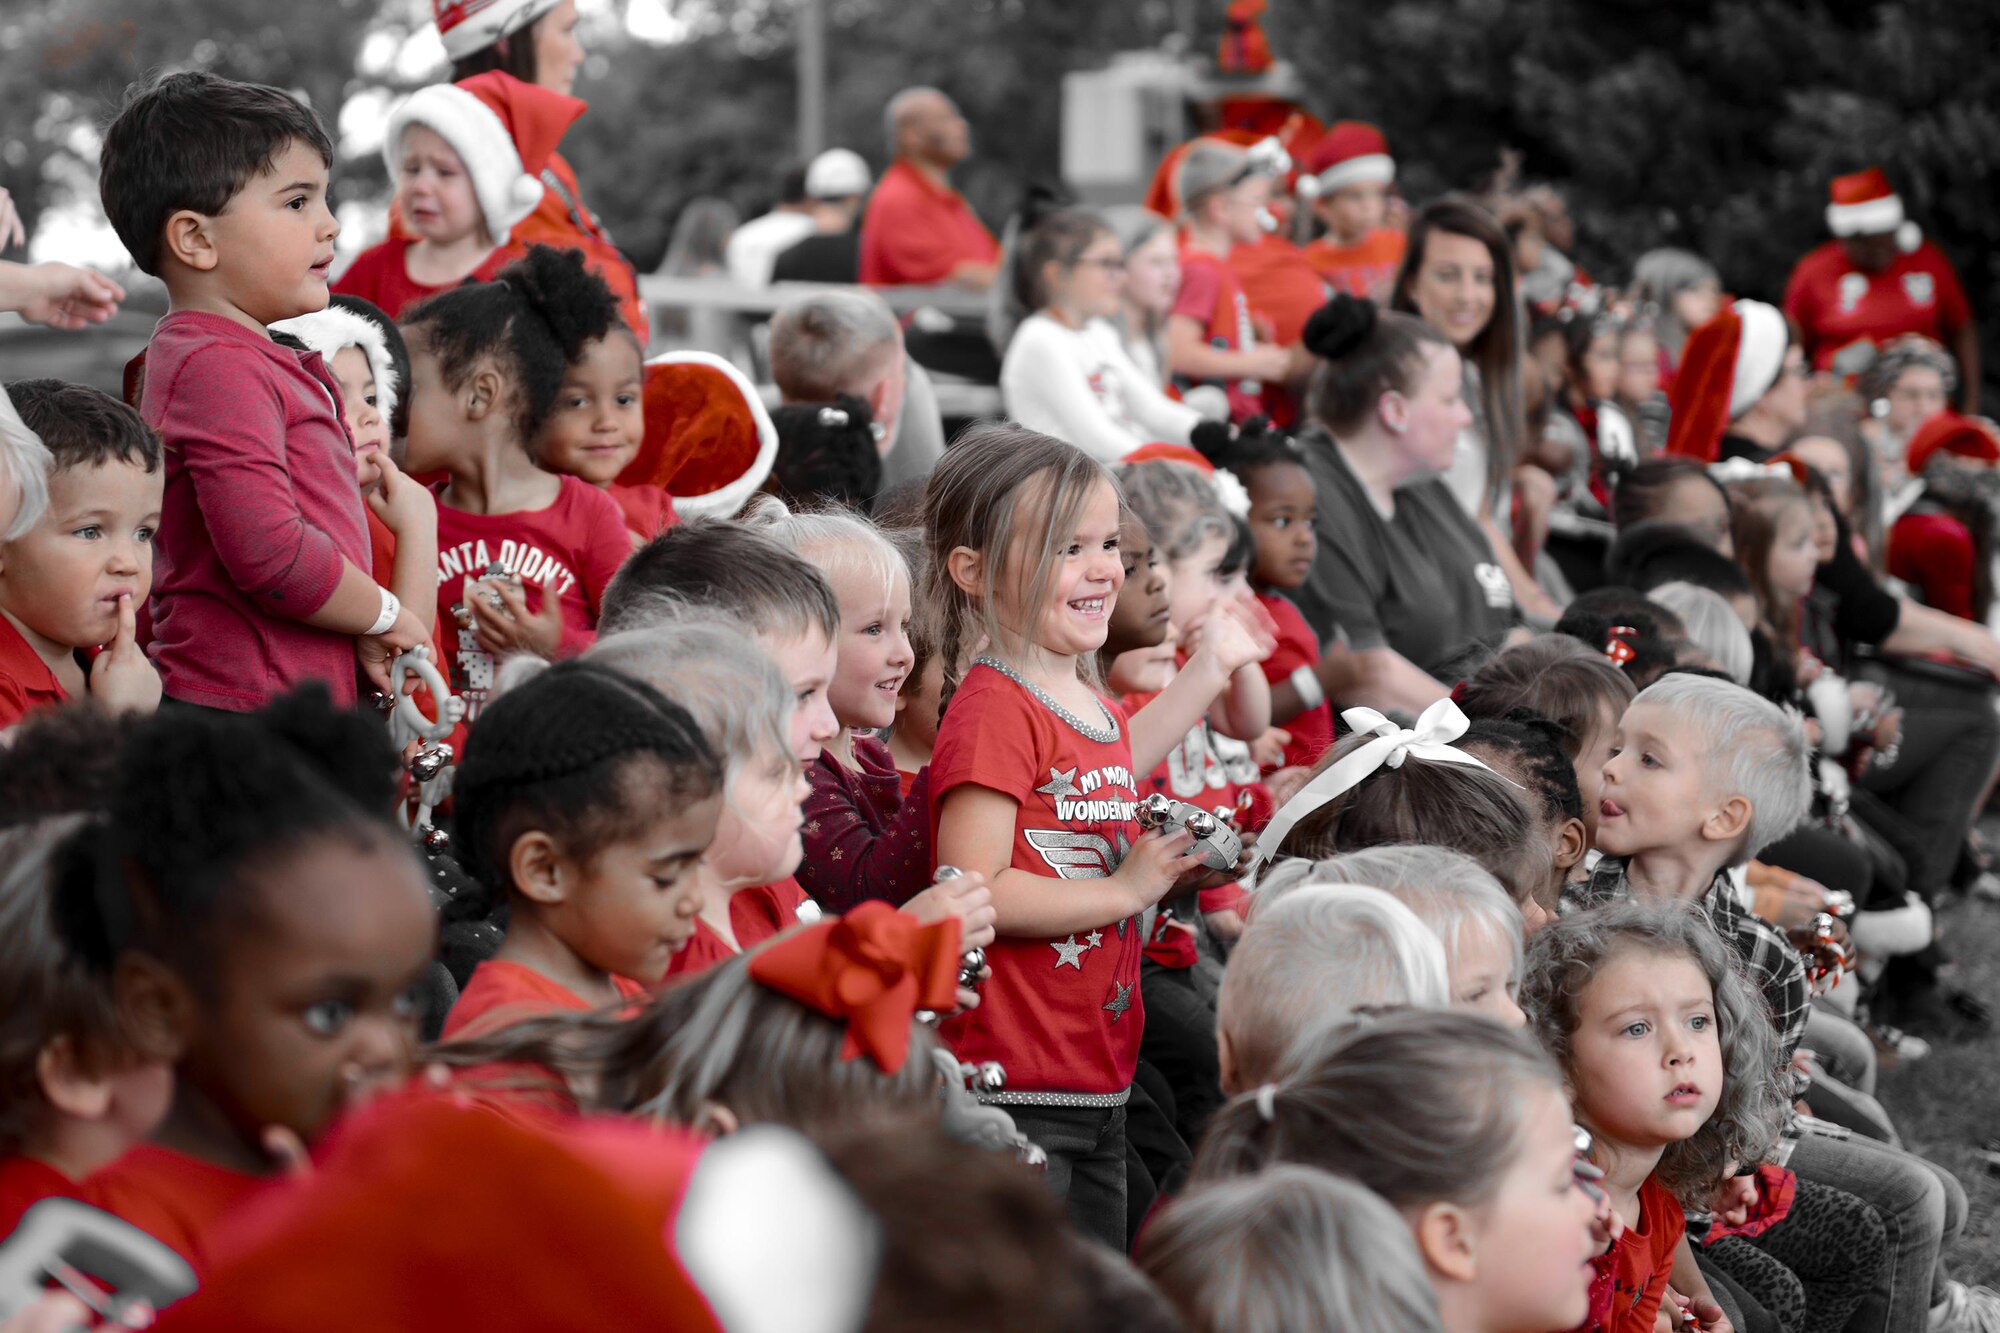 Children from the Child Development Center get ready to sing during the Tree Lighting Ceremony, Dec. 1, 2017, at Moody Air Force Base, Ga. The annual event brings the base community together as a way to show thanks for their continuous sacrifice and celebrate the holiday season. The celebration included a parade, raffle give-a-ways, children’s activities and traditional lighting of the base Christmas tree by families of deployed Airmen. (U.S. Air Force photo illustration by Airman 1st Class Erick Requadt)